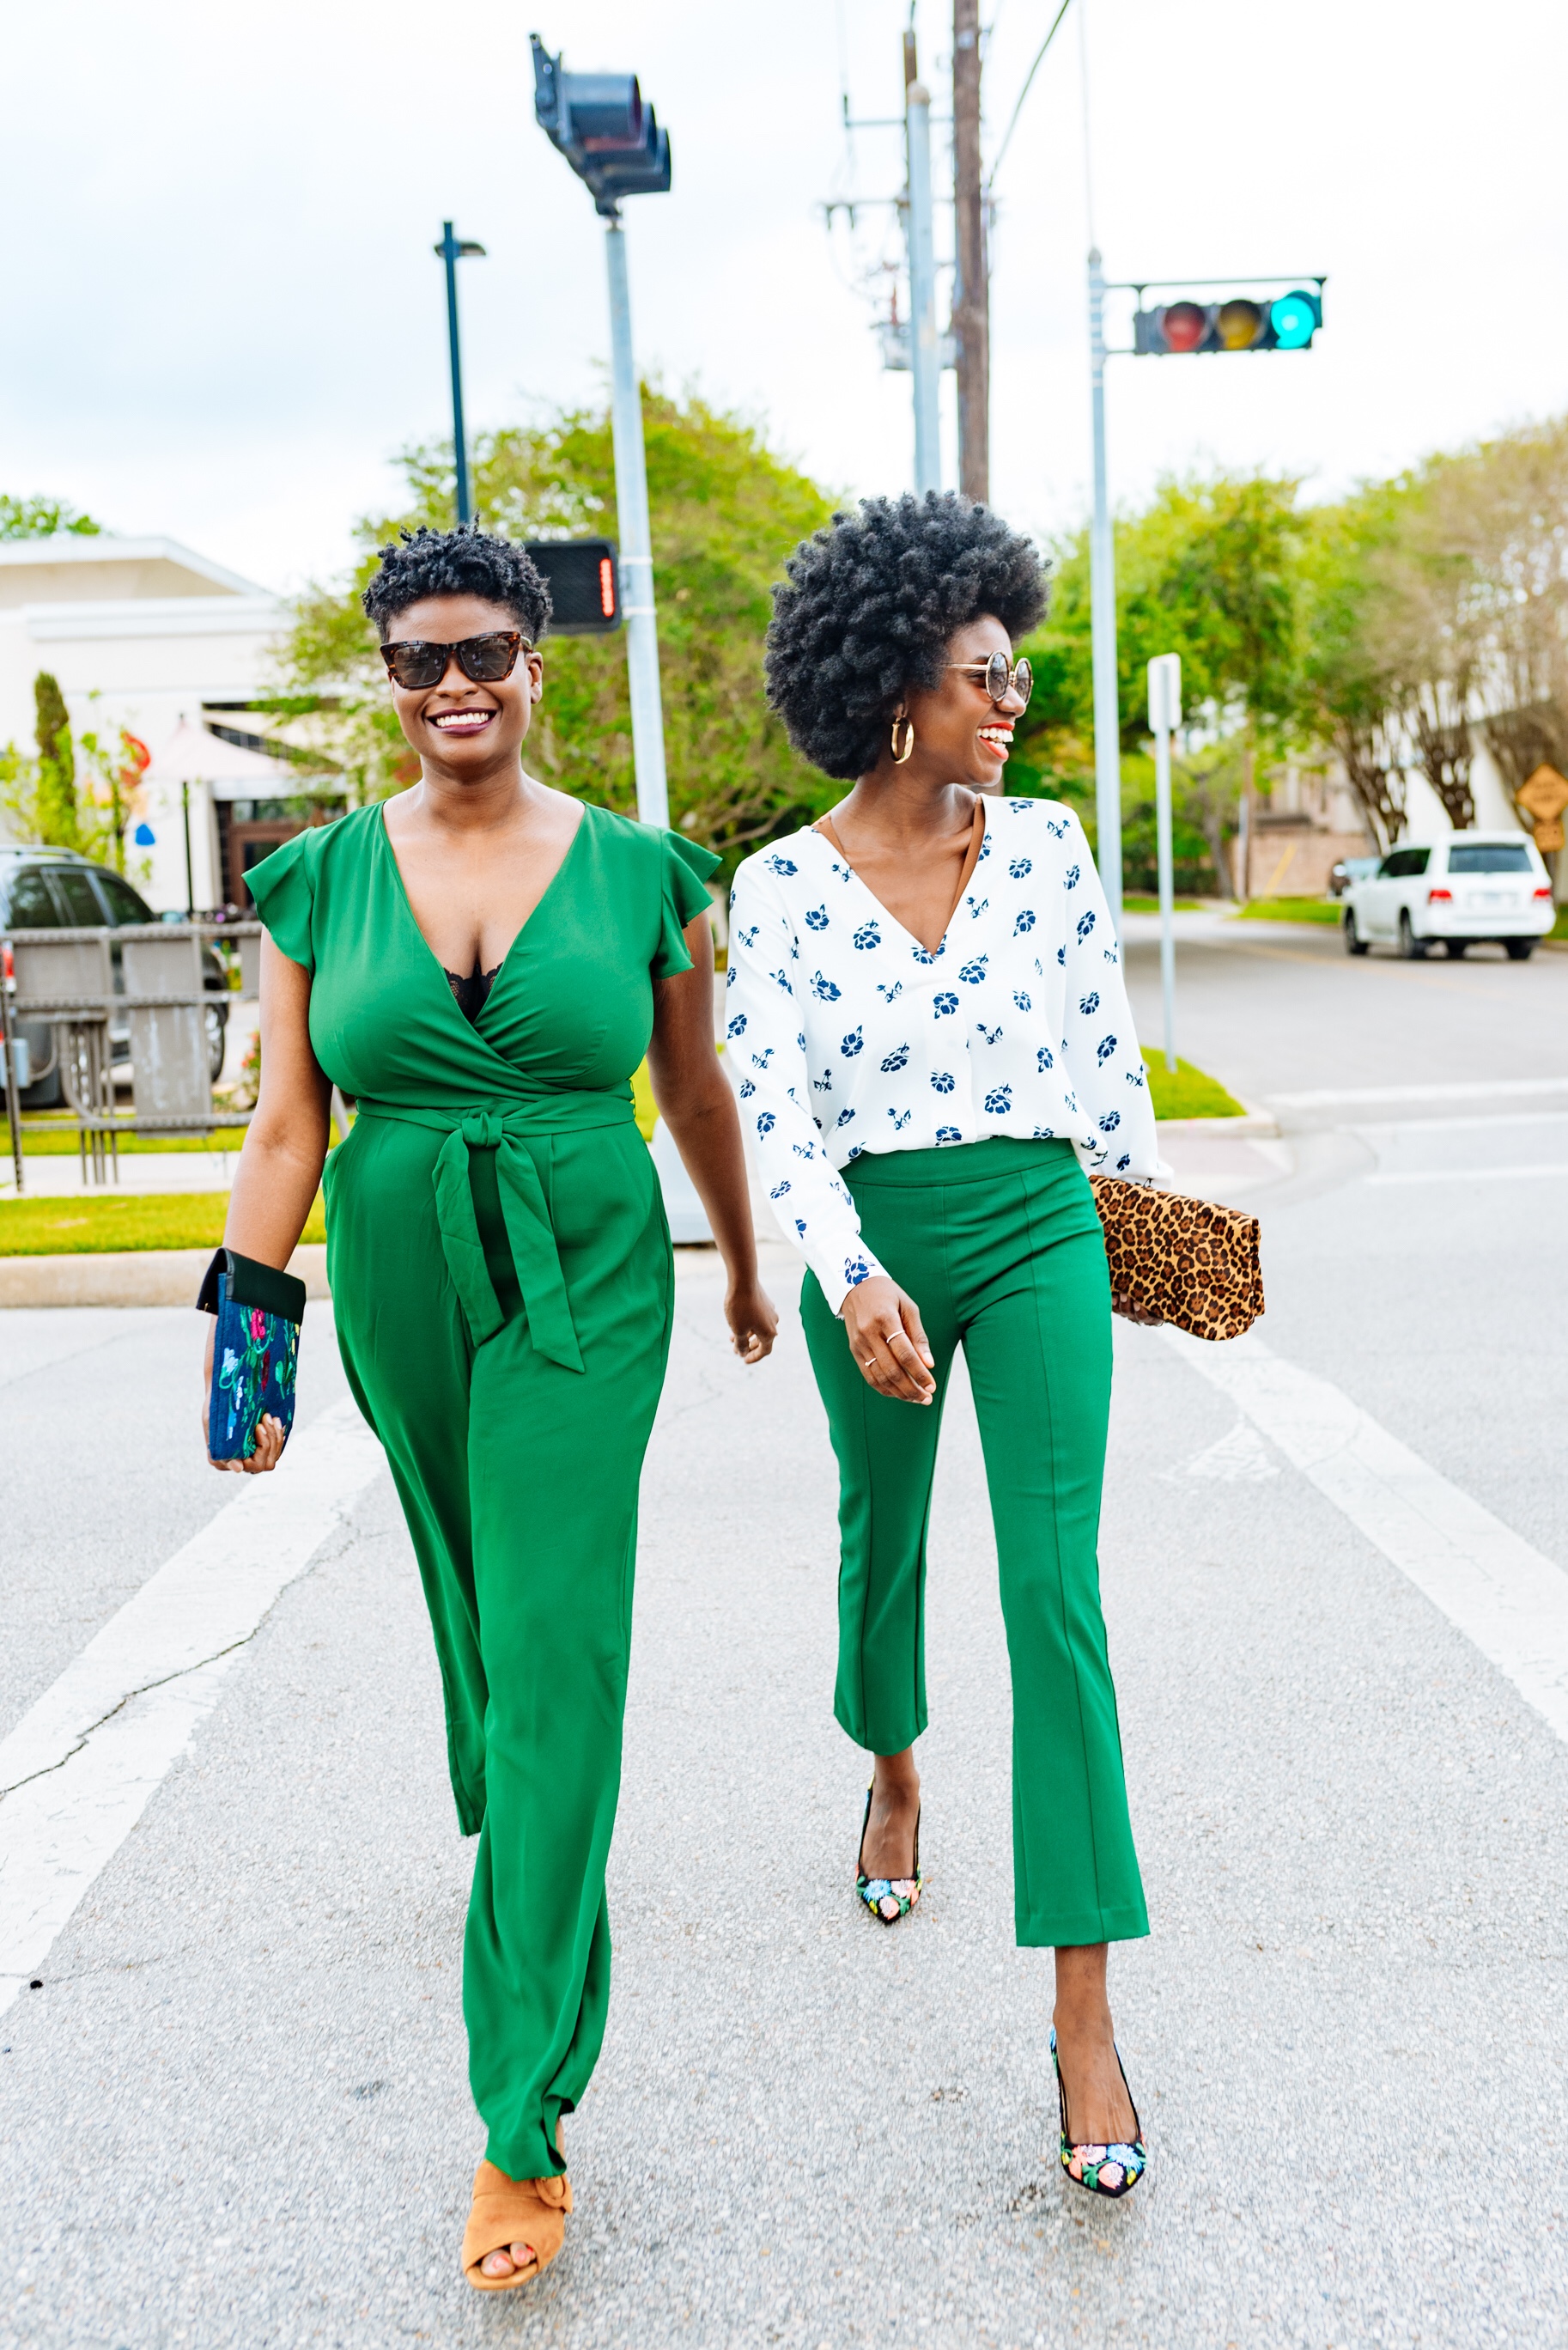 River Oaks Shopping Center, sister photos, natural hair, green spring outfits, tapered afro, twa, natural hair fro, girls day out ideas